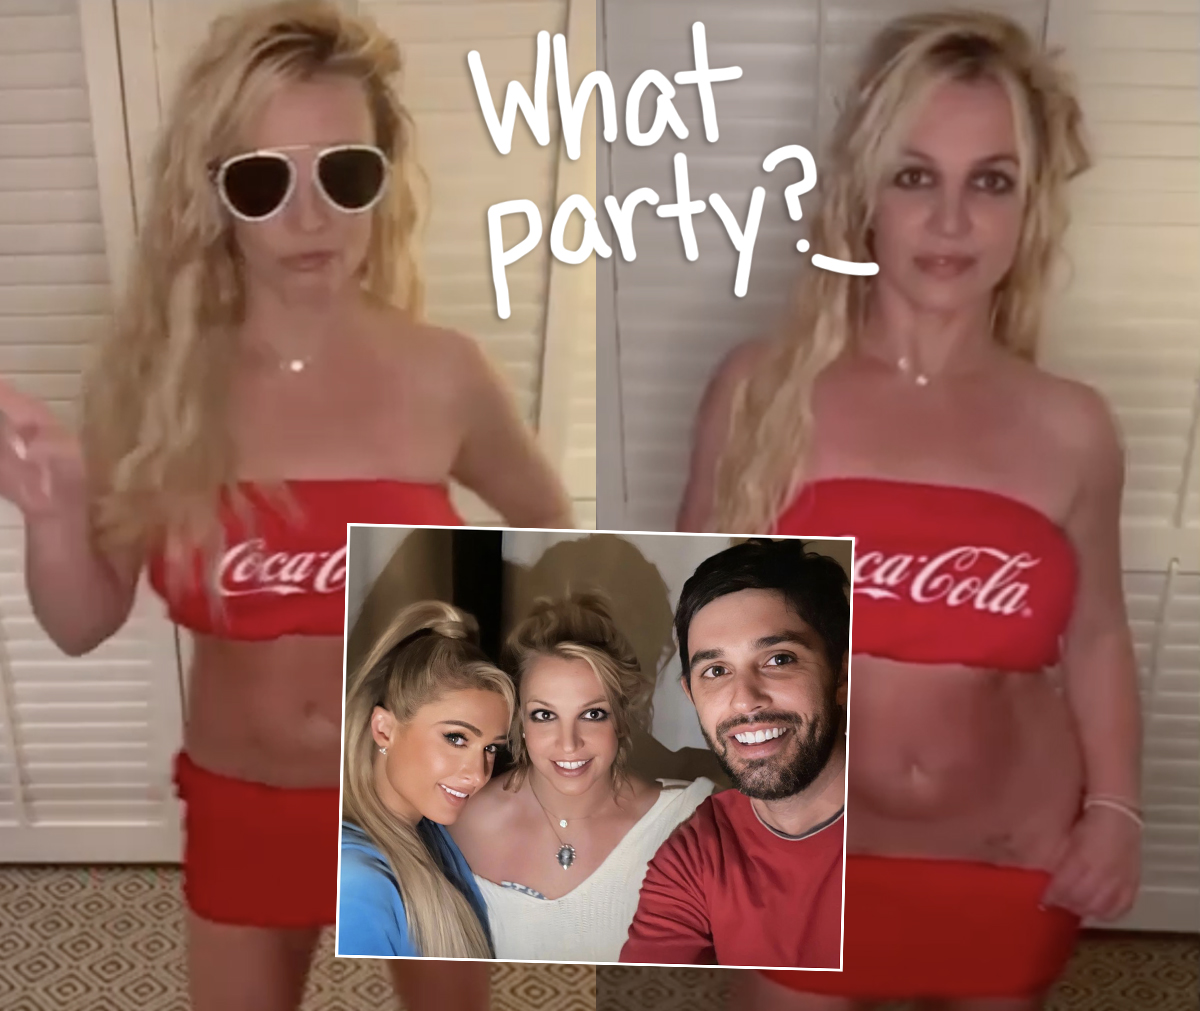 #Britney Spears Now DENYING Birthday Bash Attendance After Paris Hilton’s Questionable Selfie!